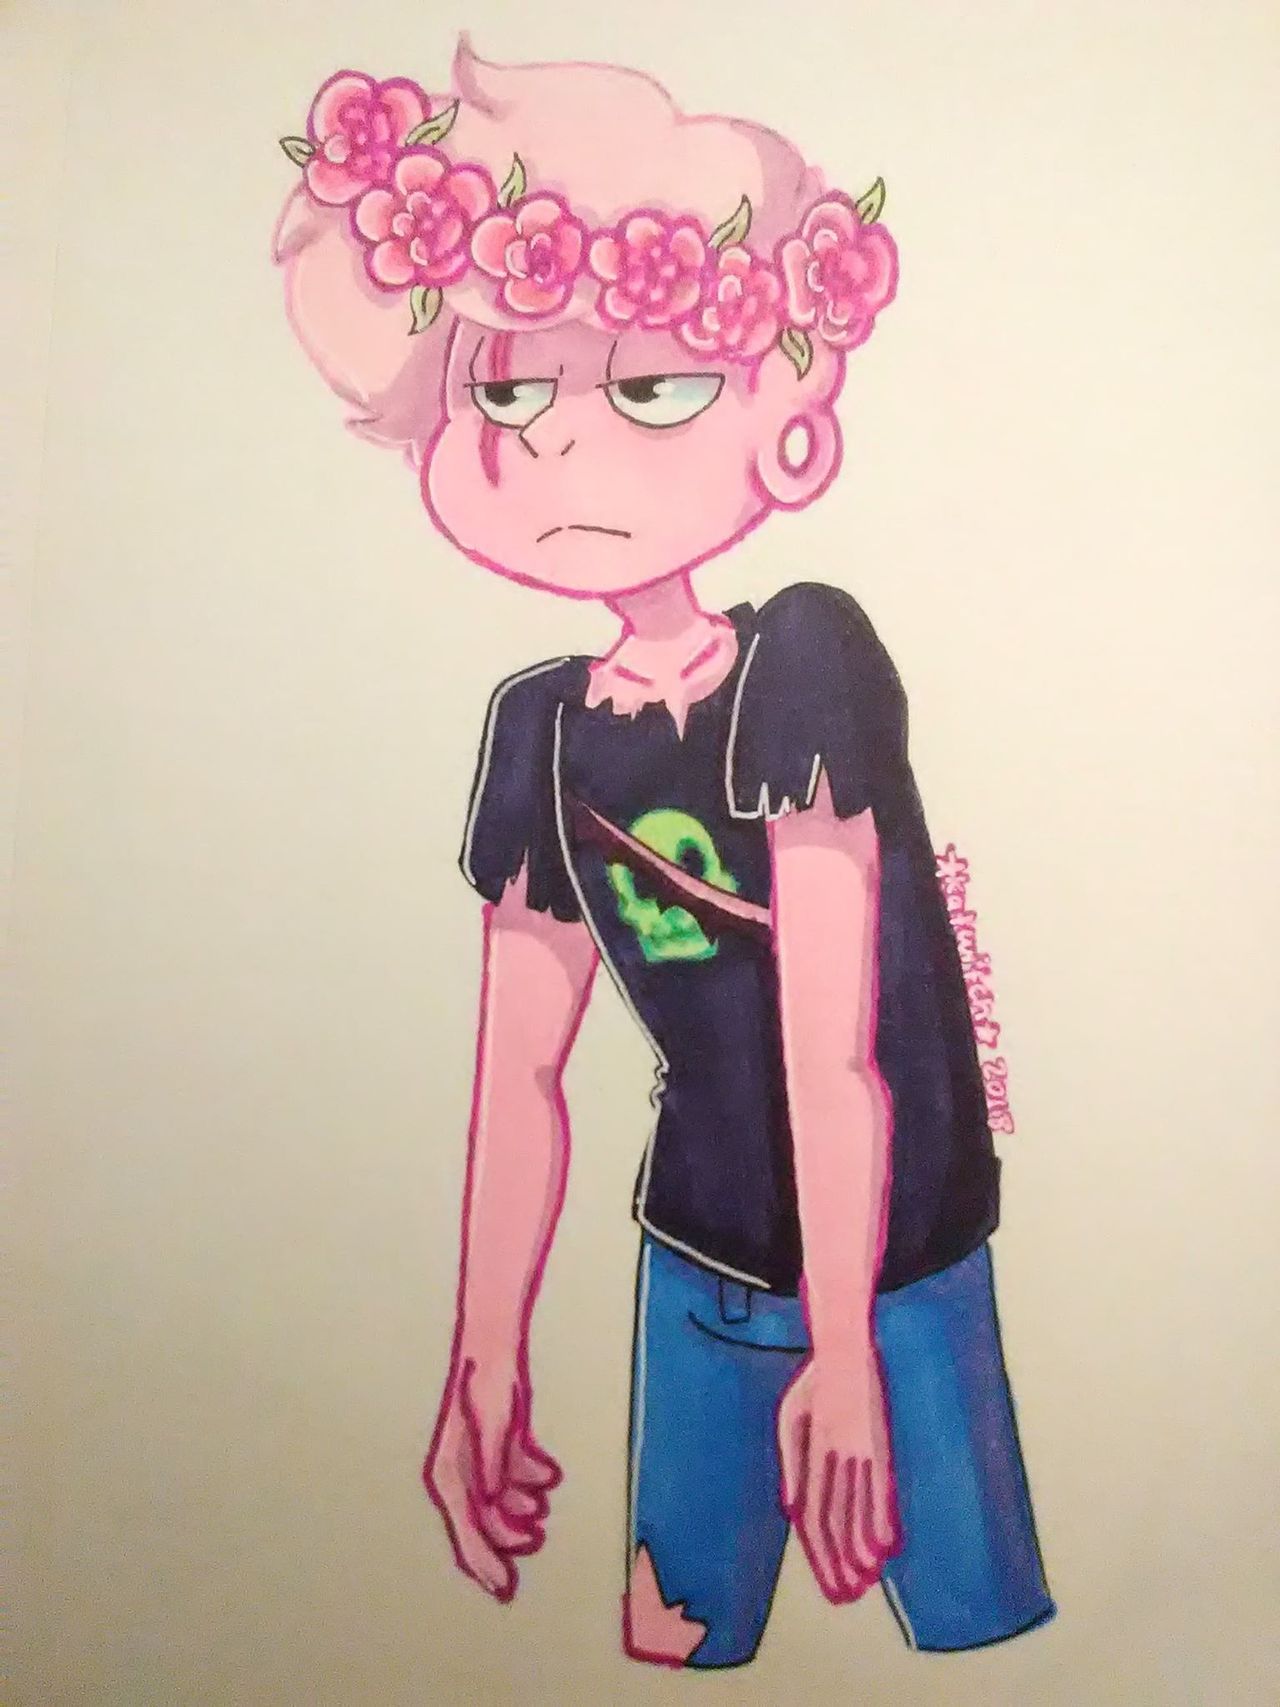 Pink Lars Doodle Idk why but I just suddenly really wanted to draw pink Lars. I may draw more of him in the future idk.